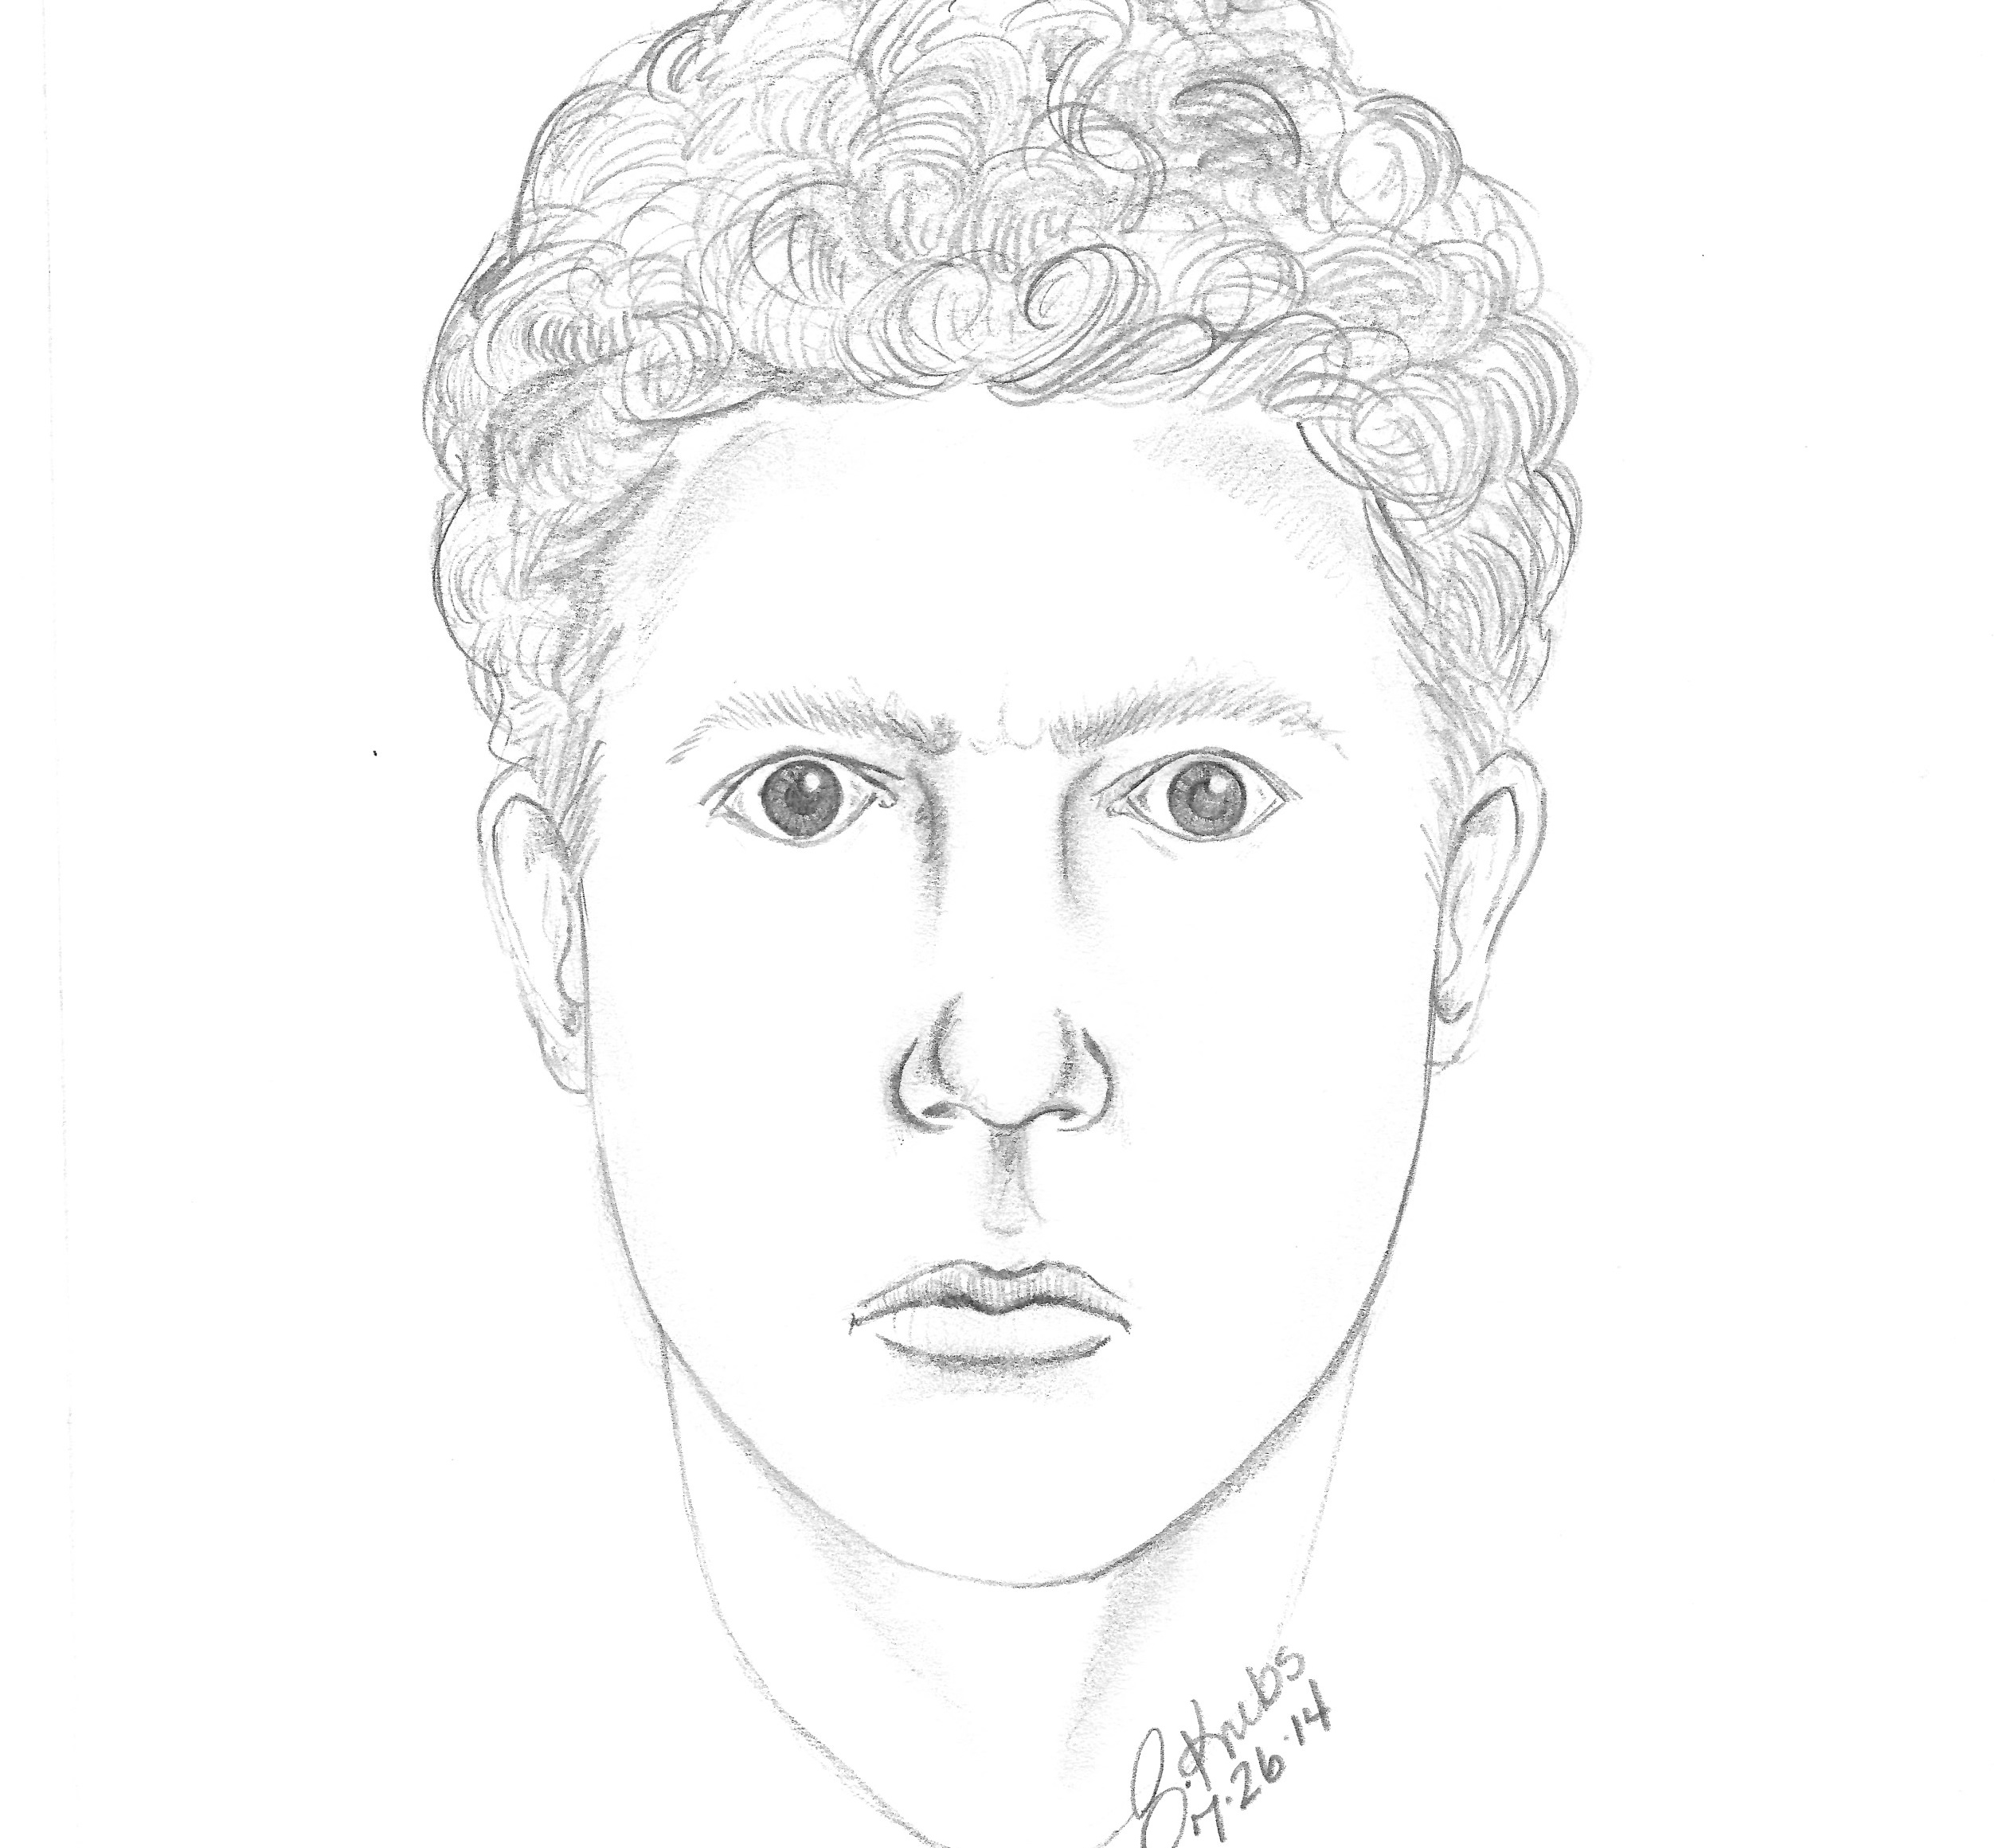 Police are asking for help locating the man in this composite sketch. (Armada Police)